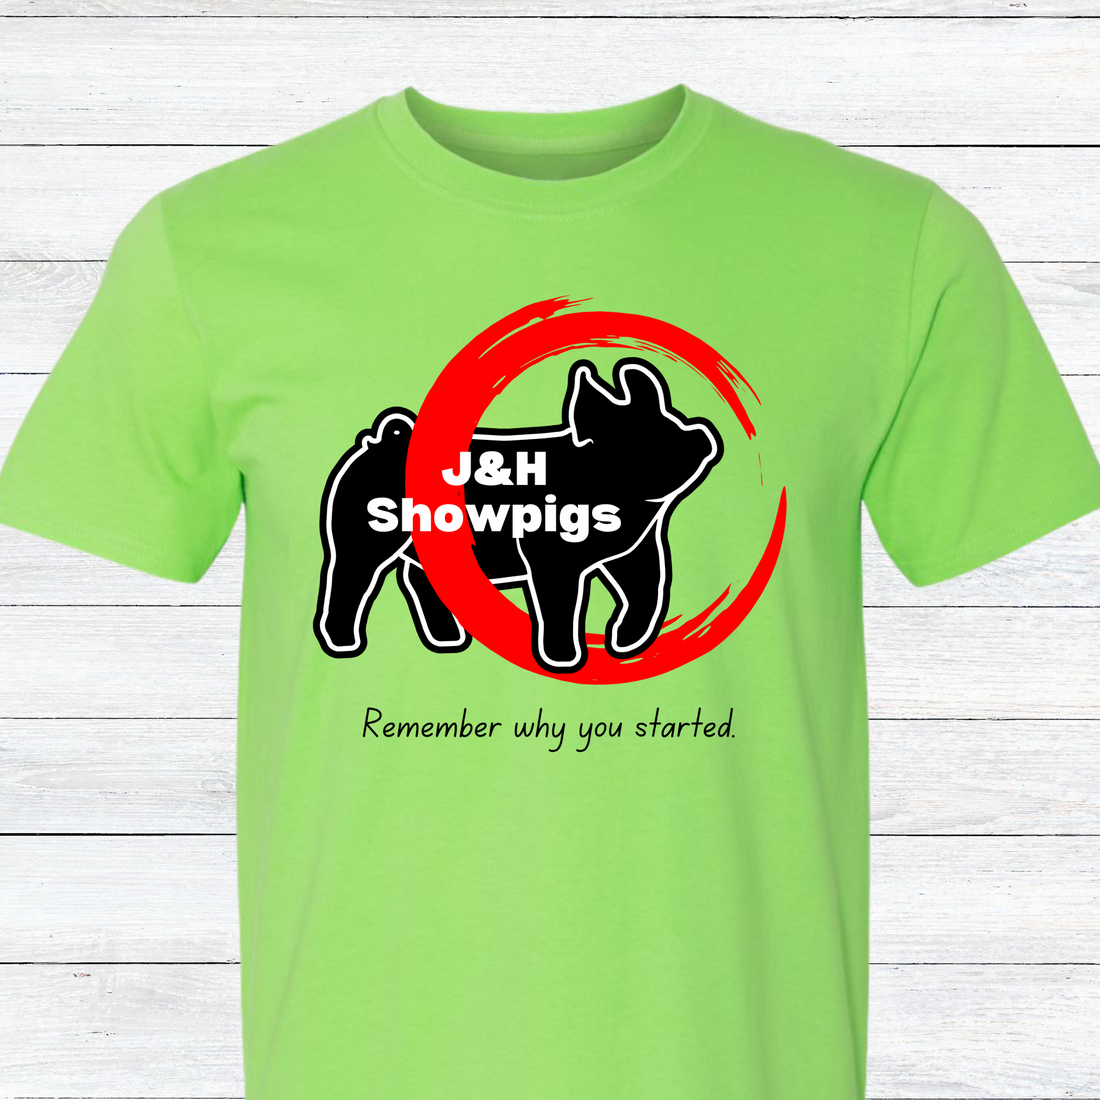 J&amp;H Showpigs.3- Remember Why You Started TEE